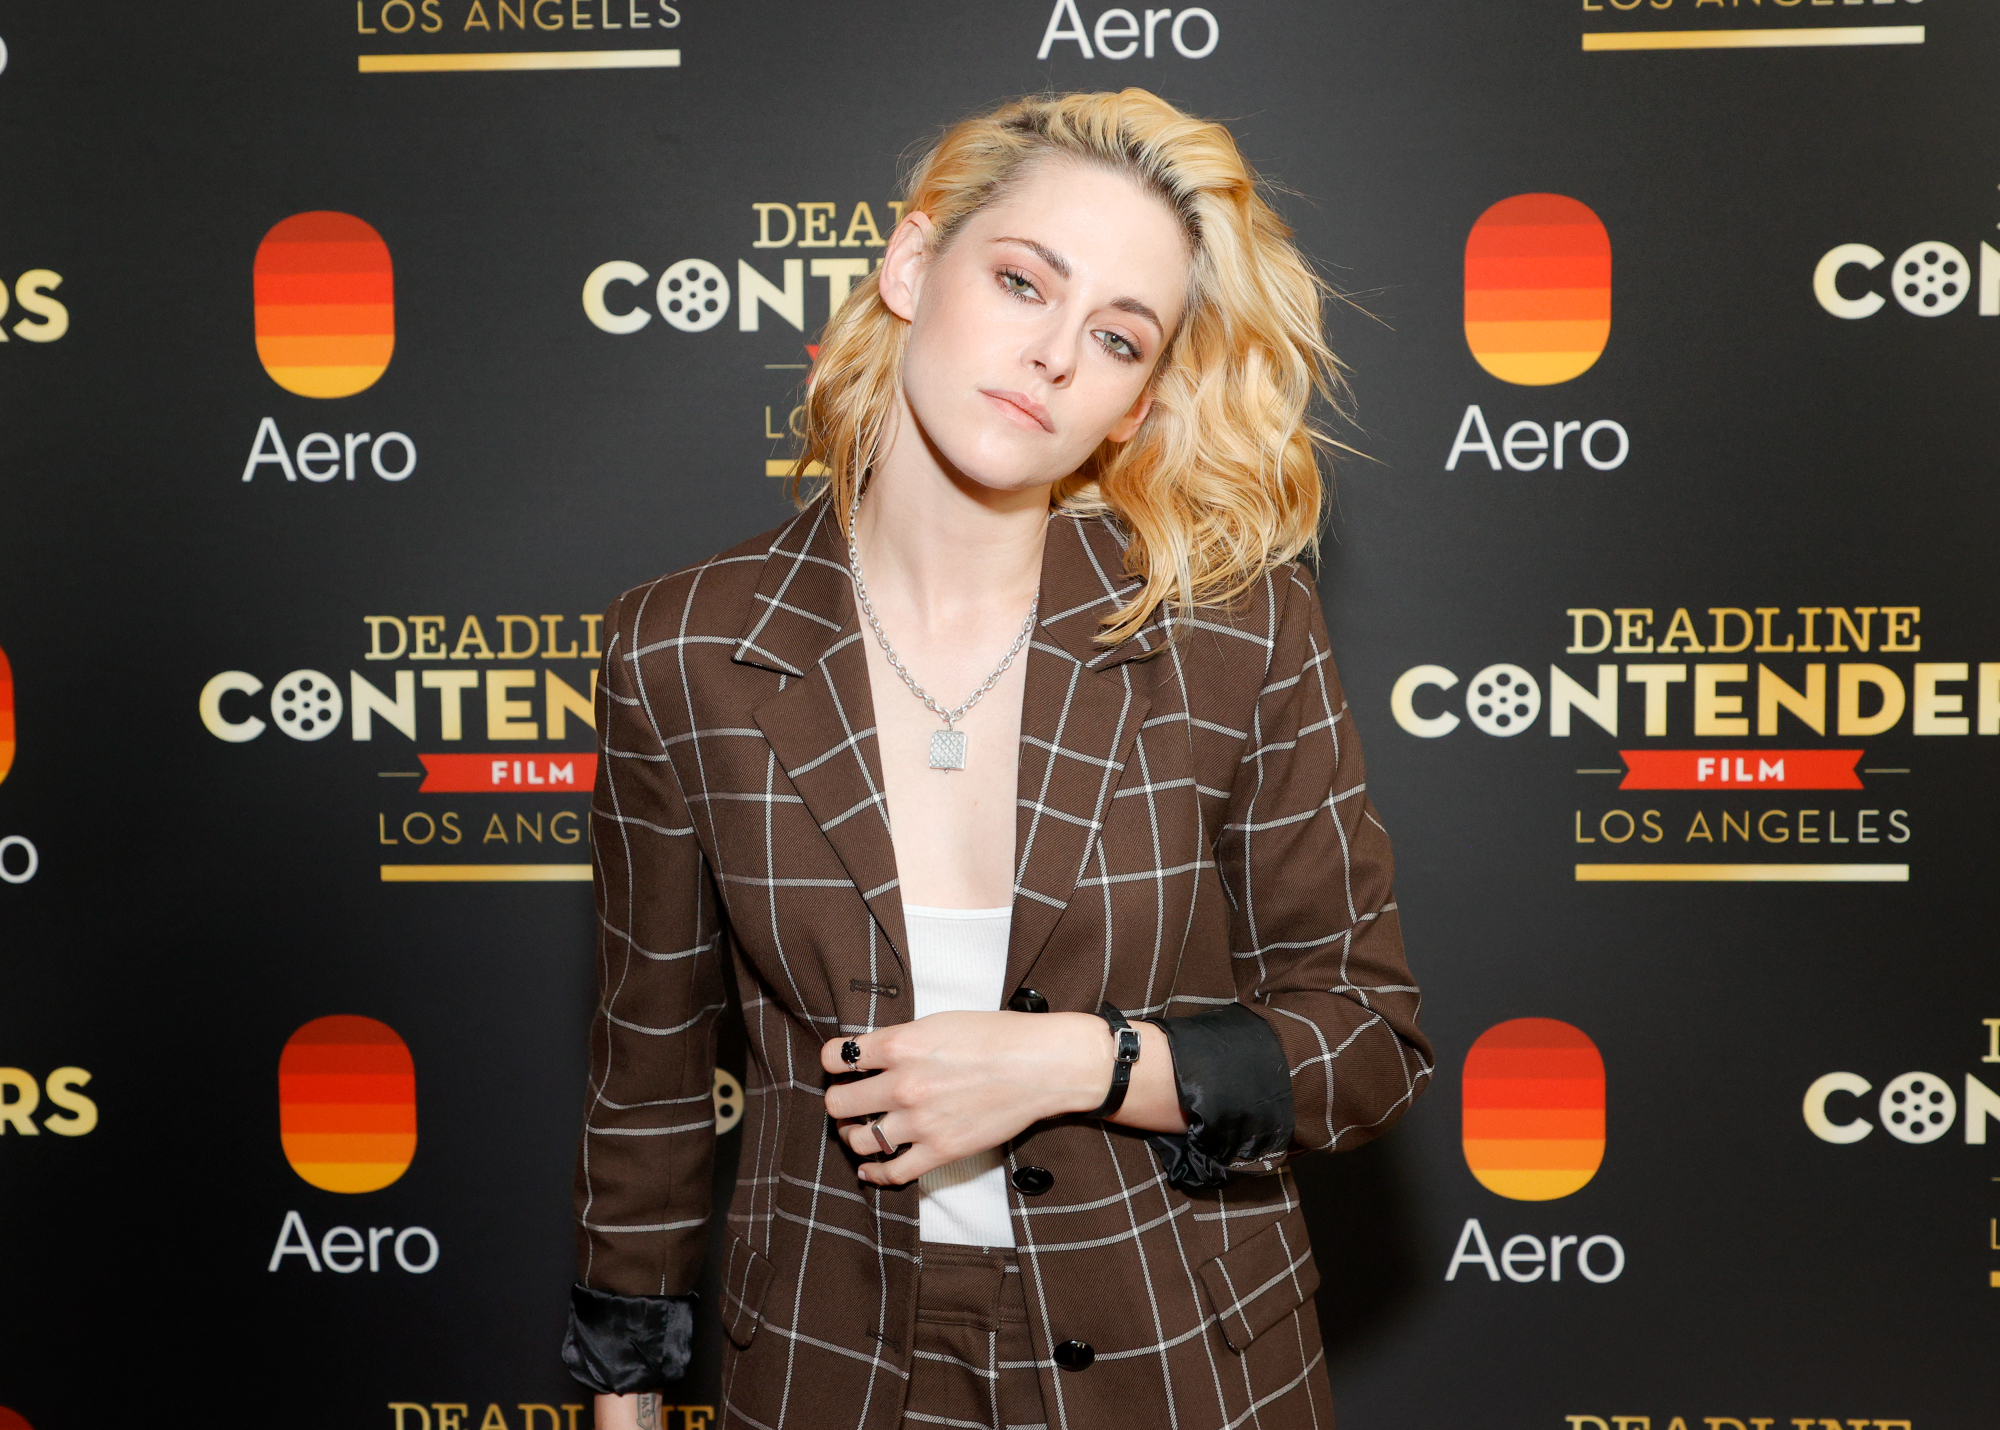 'Spencer' star Kristen Stewart wearing a brown jacket and pants in front of a step and repeat